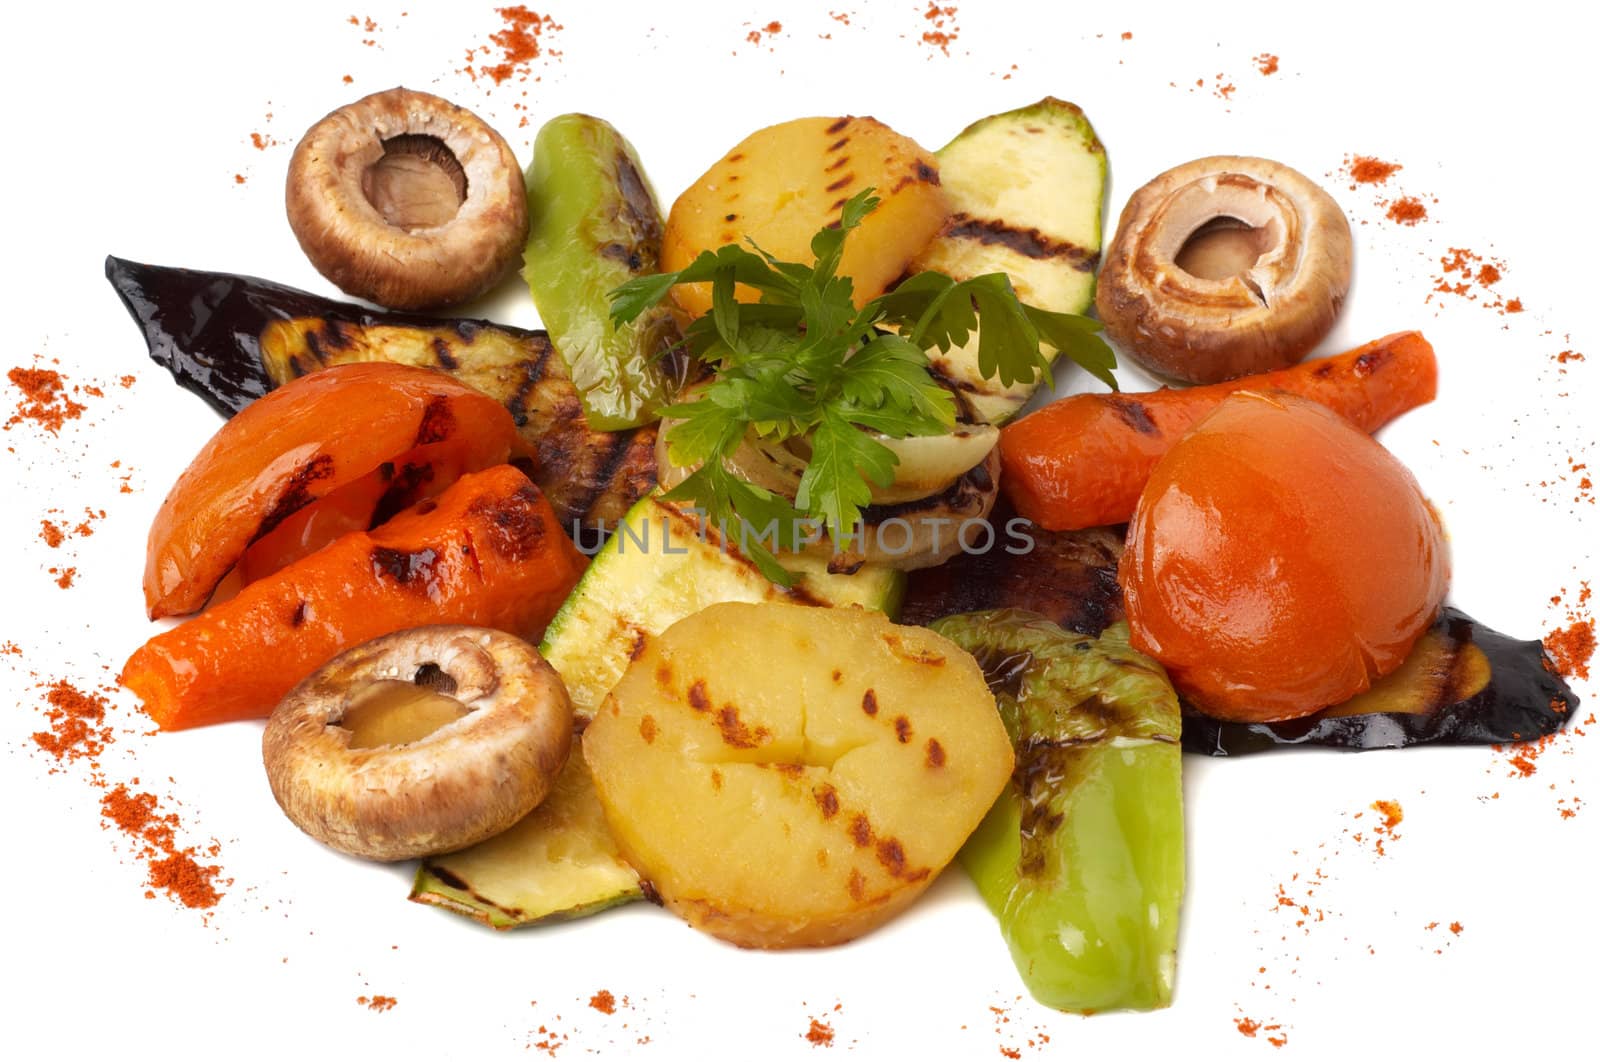 grilled vegetables dish by starush